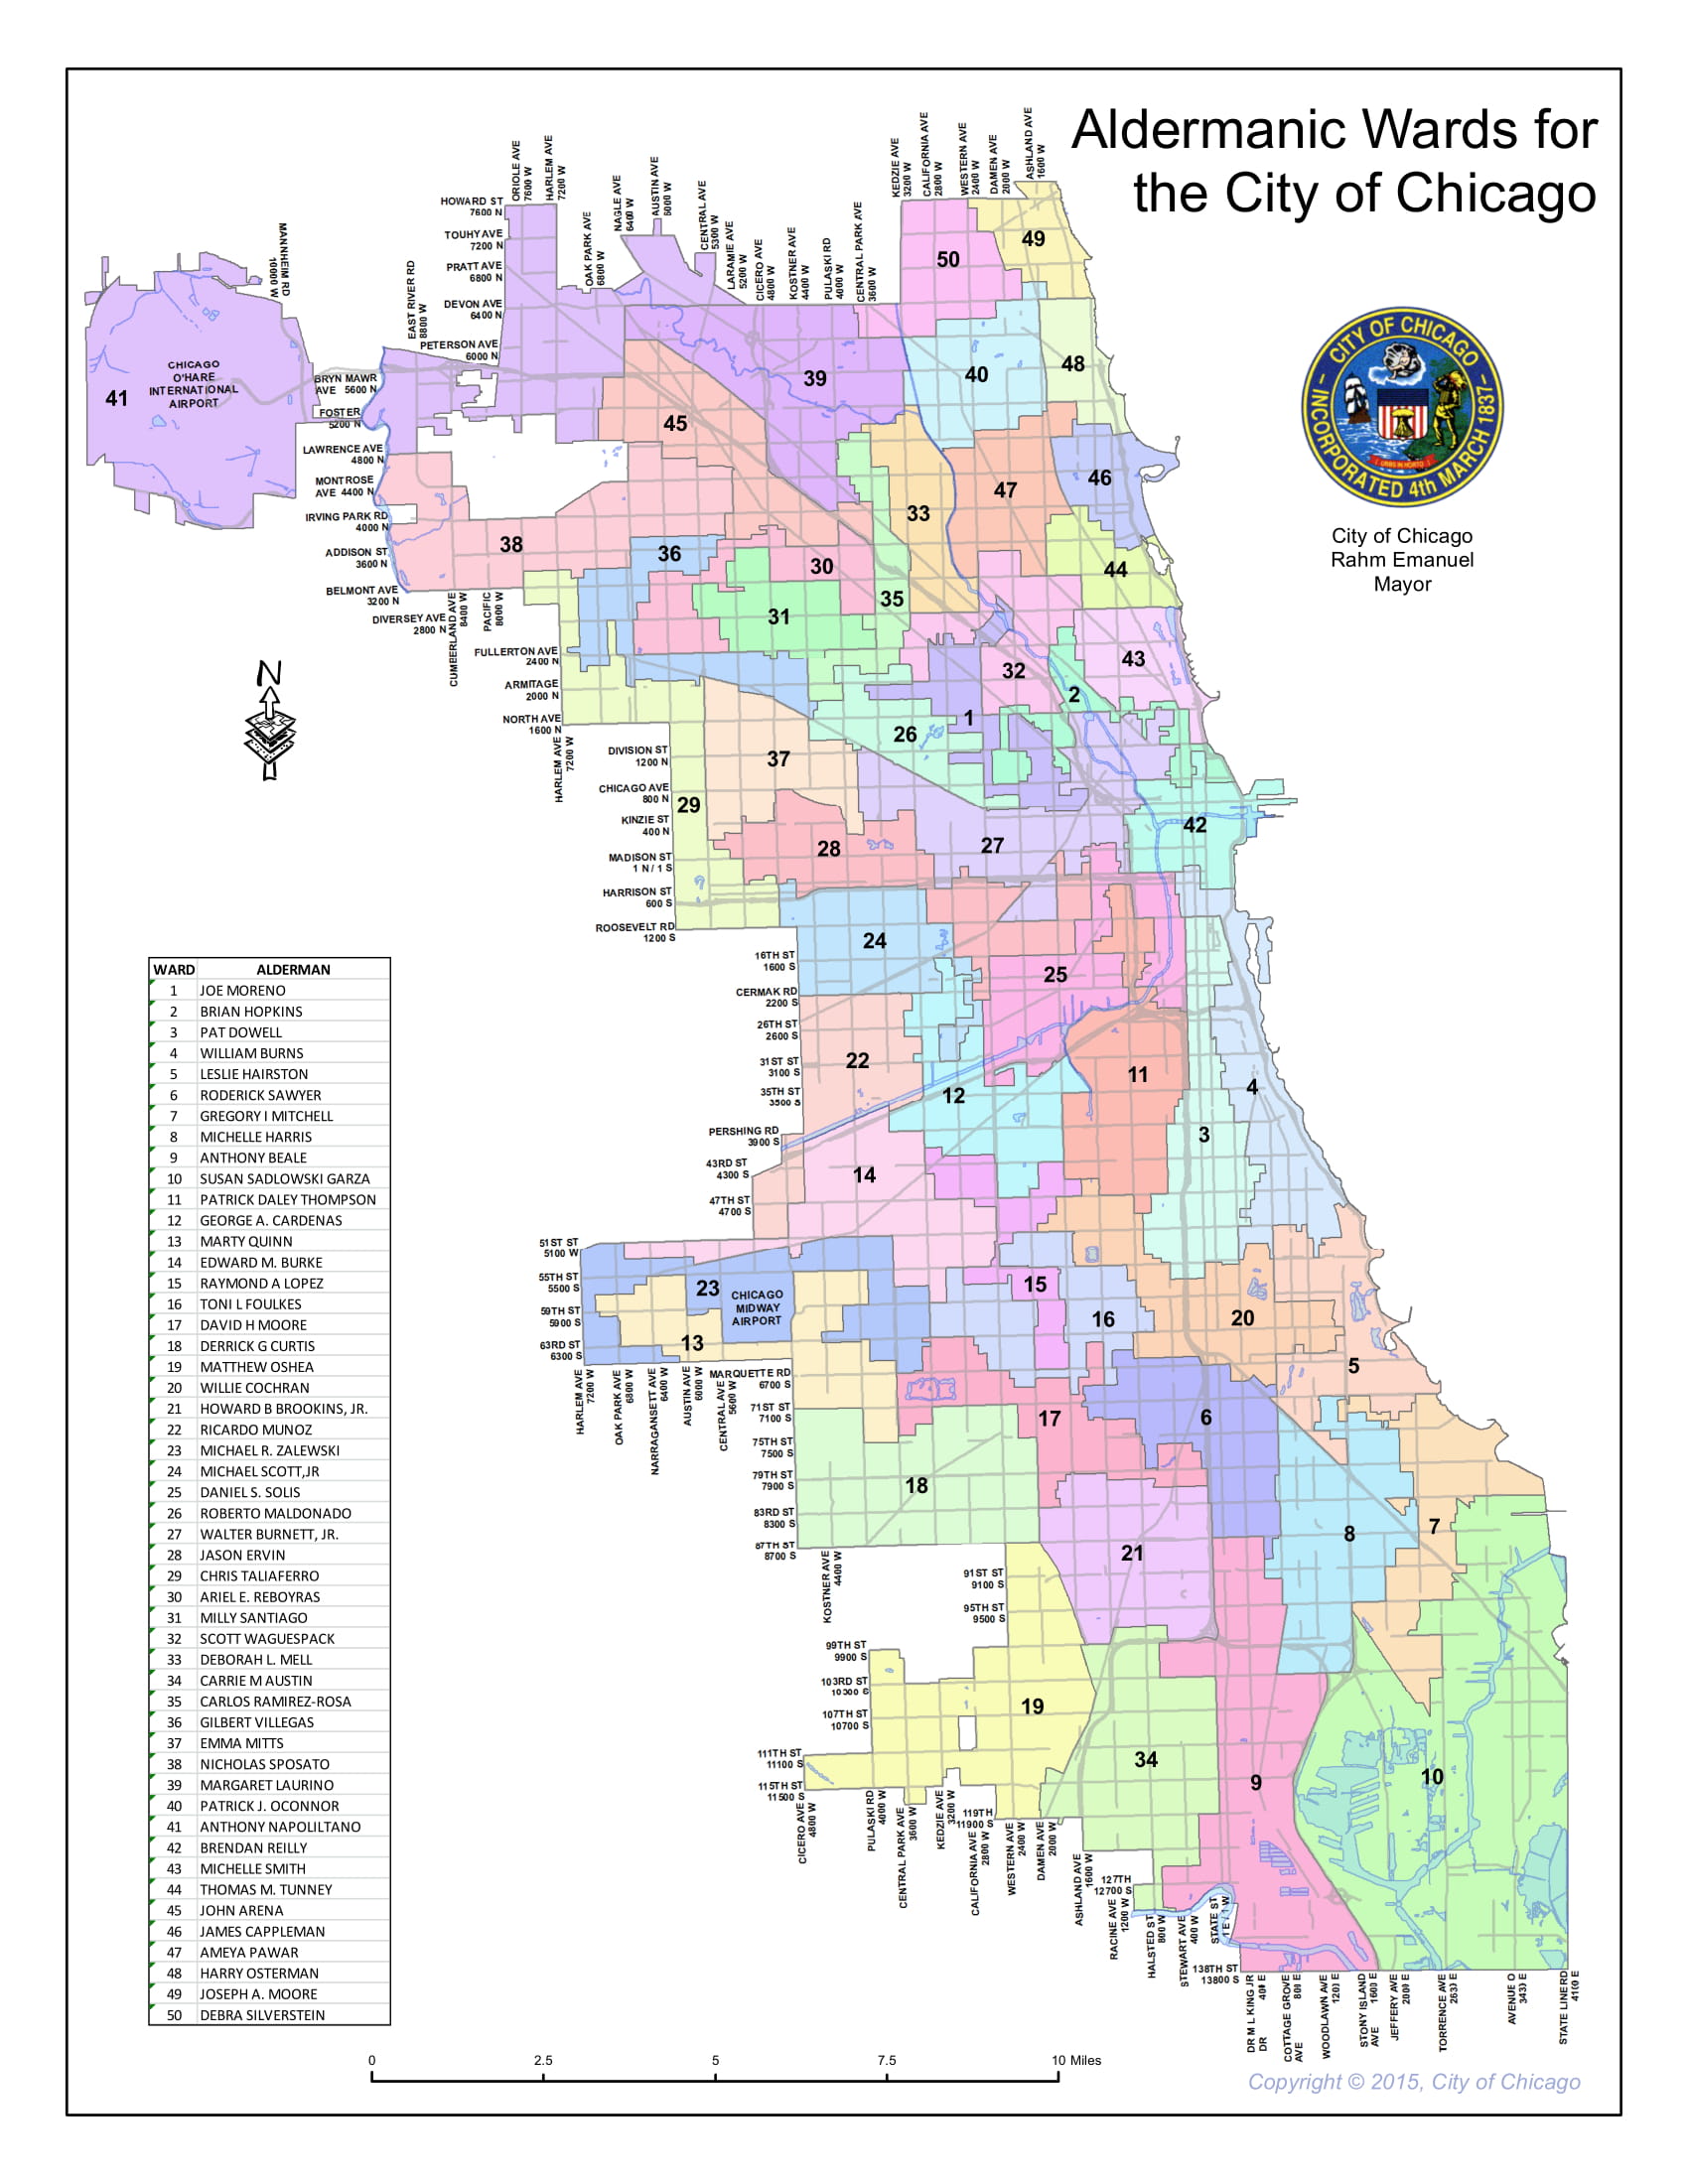 Chicago community areas ward map